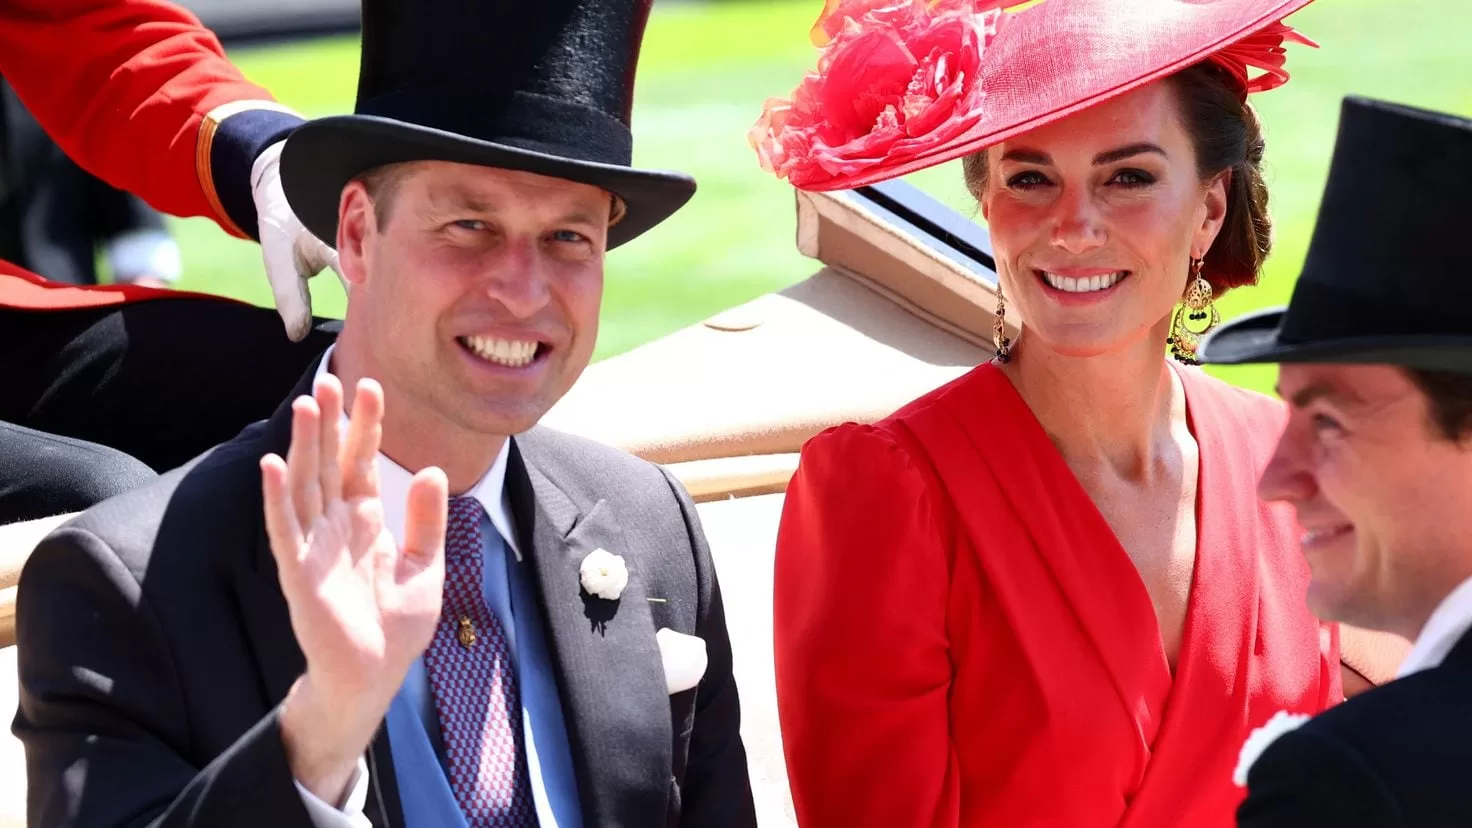 Princes of Wales: the nicknames of Prince William and Kate Middleton and their meaning
